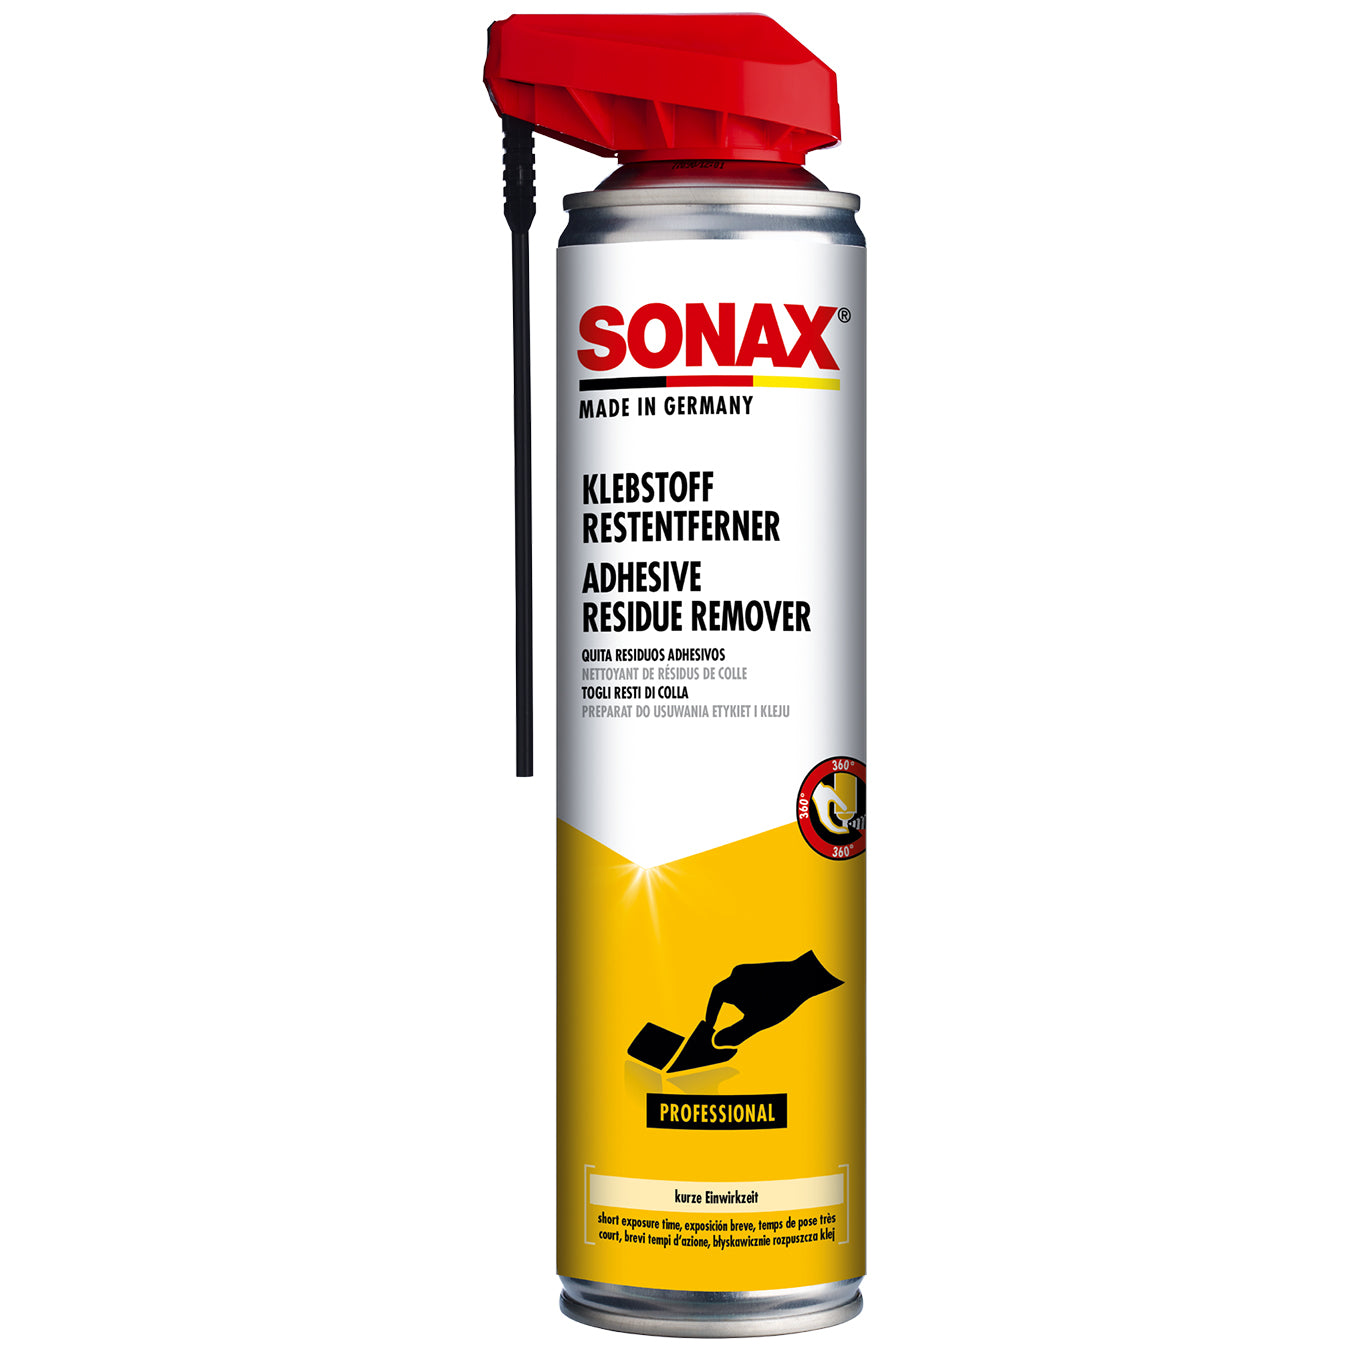 SONAX Adhesive Residue Remover with EasySpray